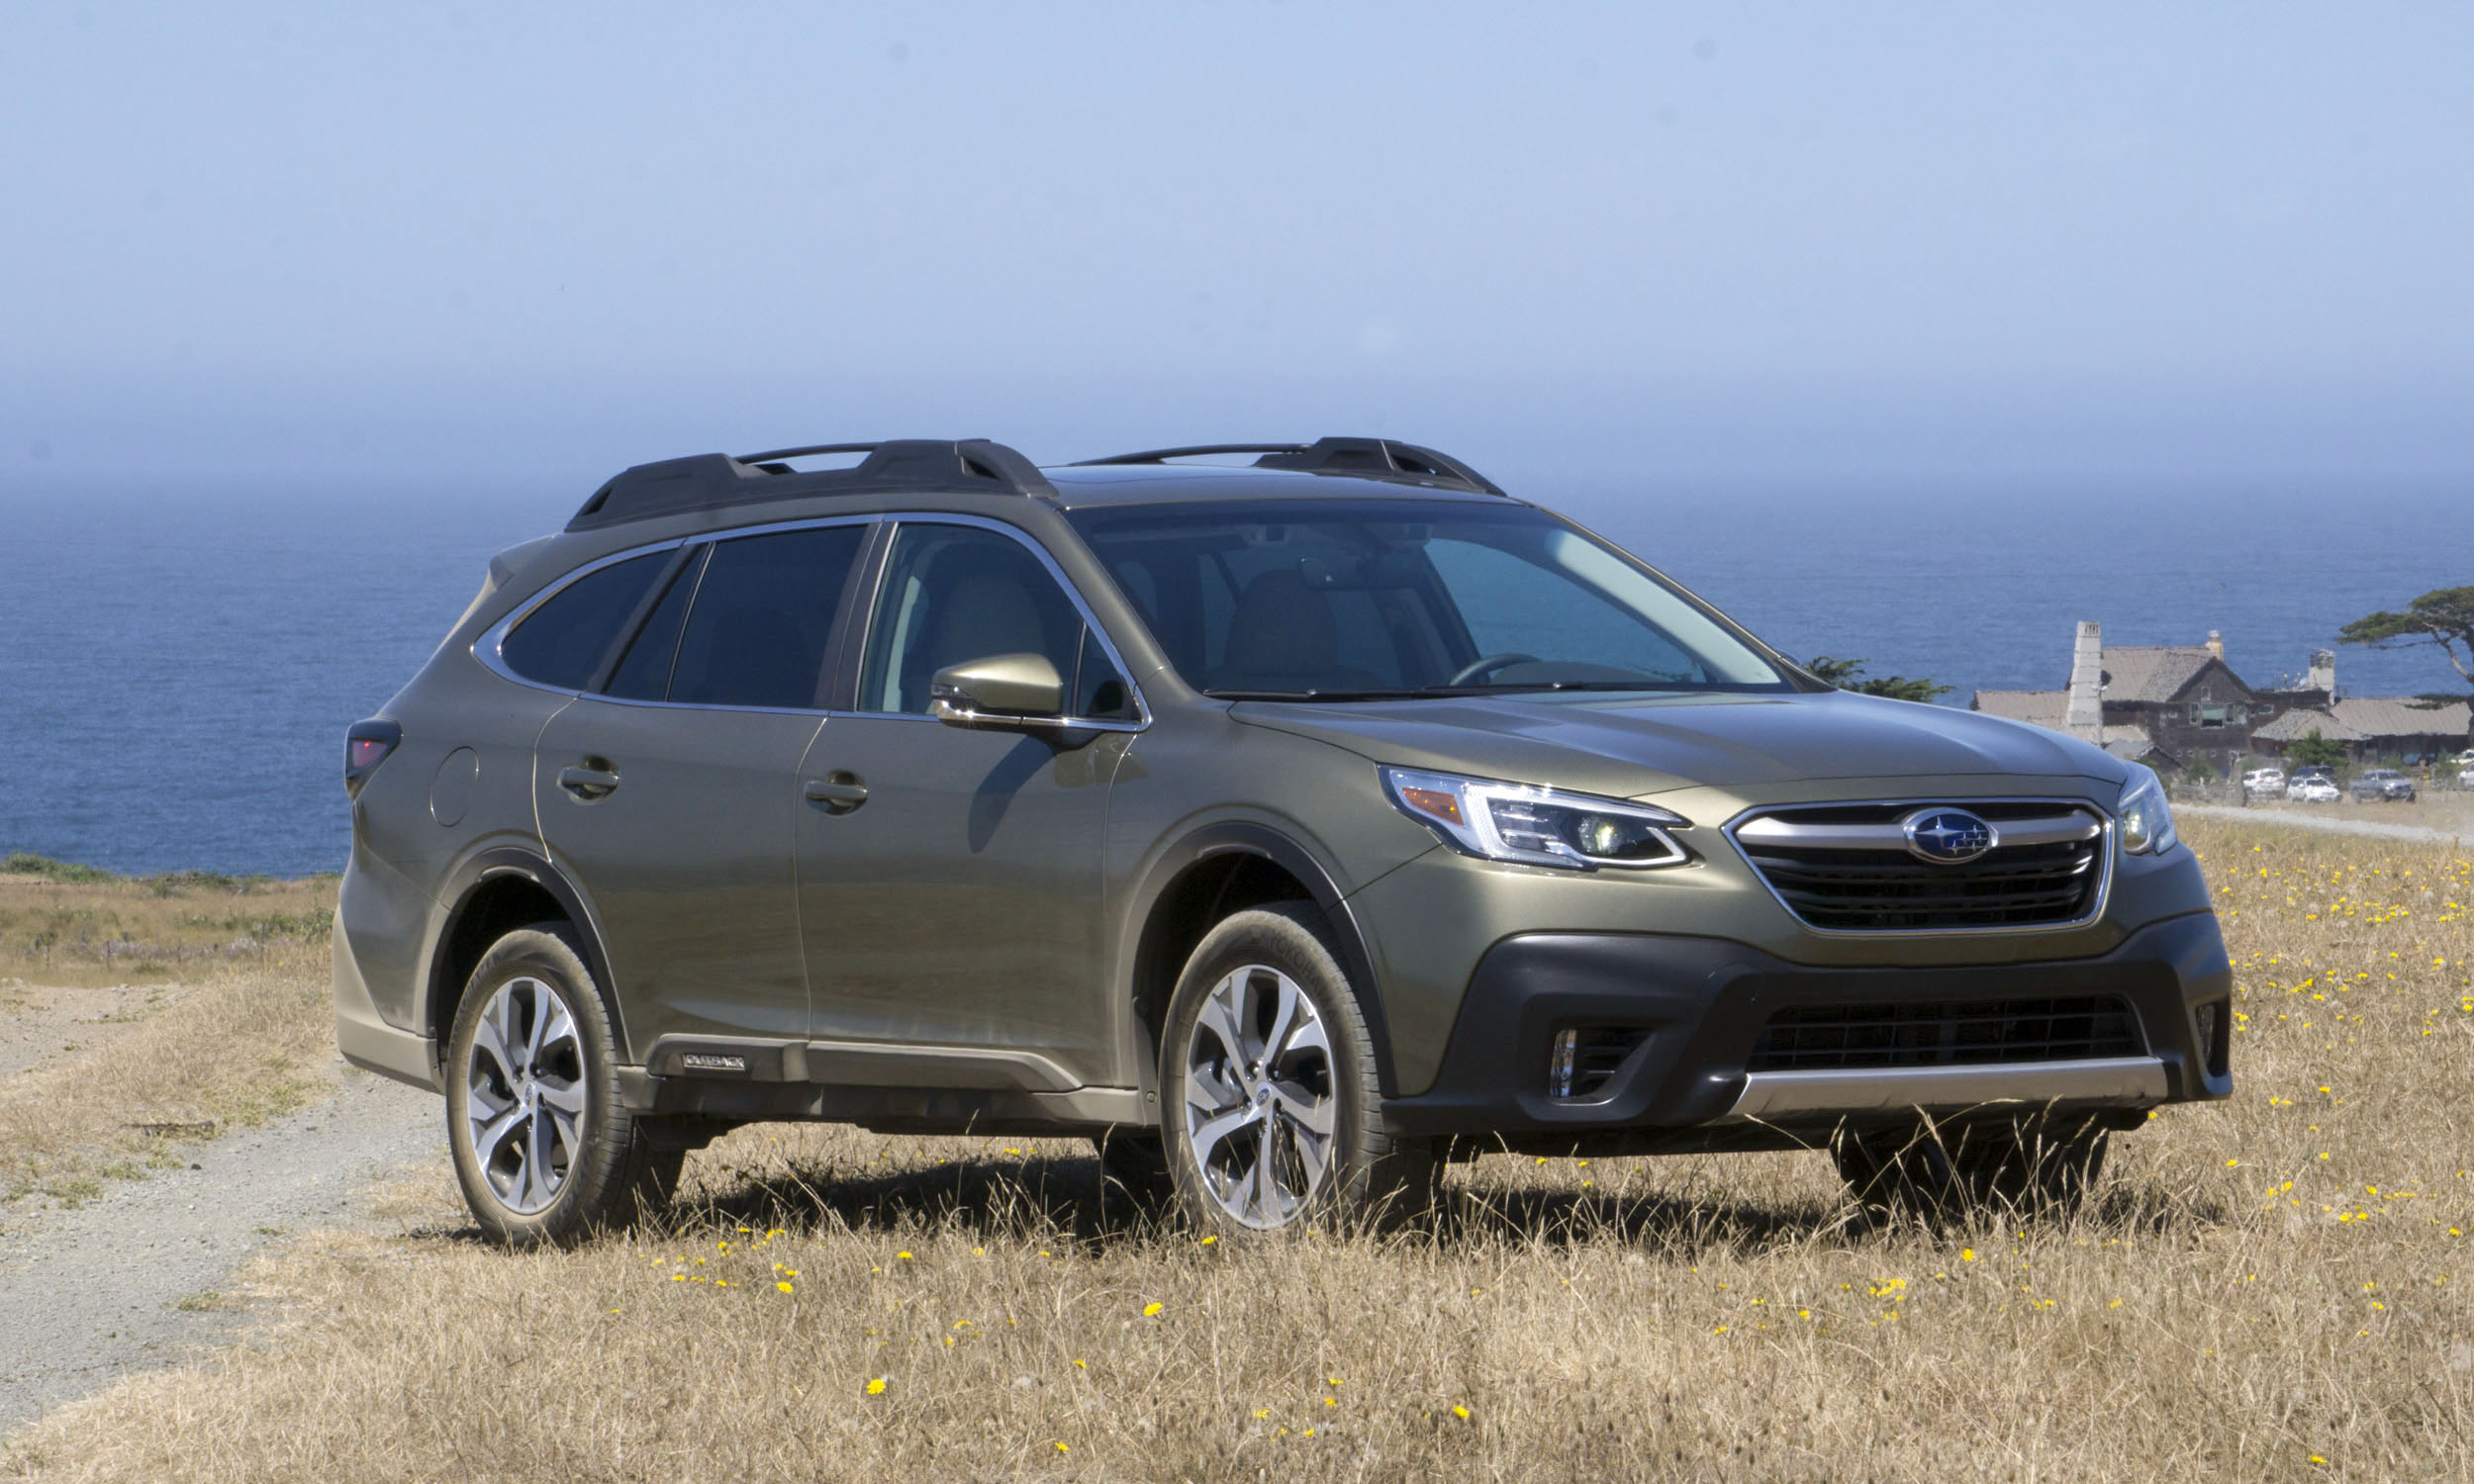 2020 Subaru Outback: First Drive Review | Our Auto Expert